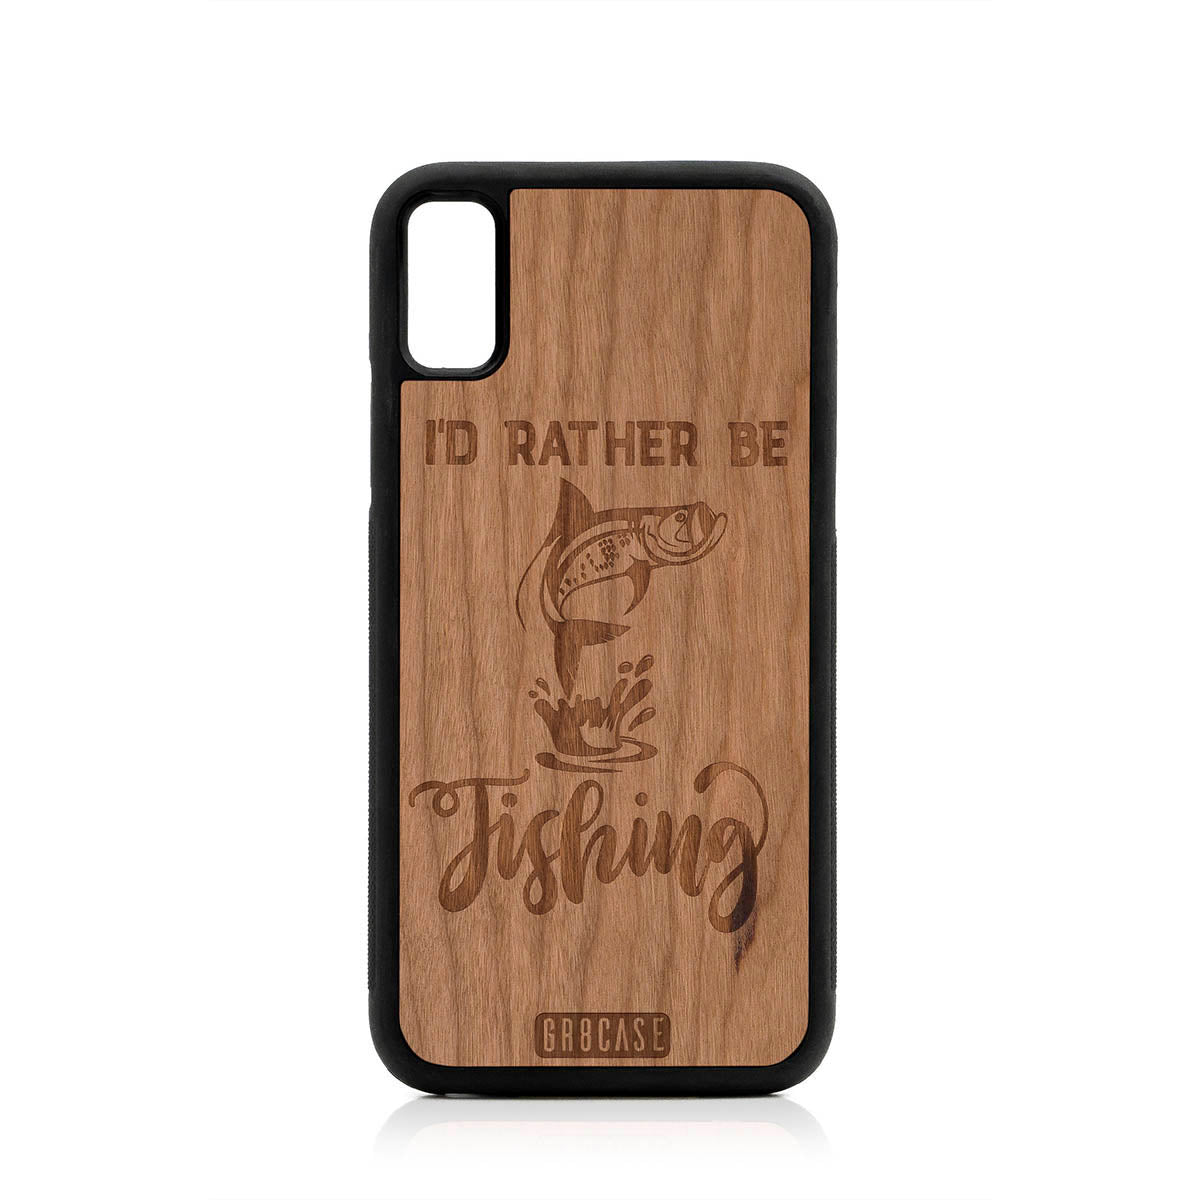 I'D Rather Be Fishing Design Wood Case For iPhone XS Max